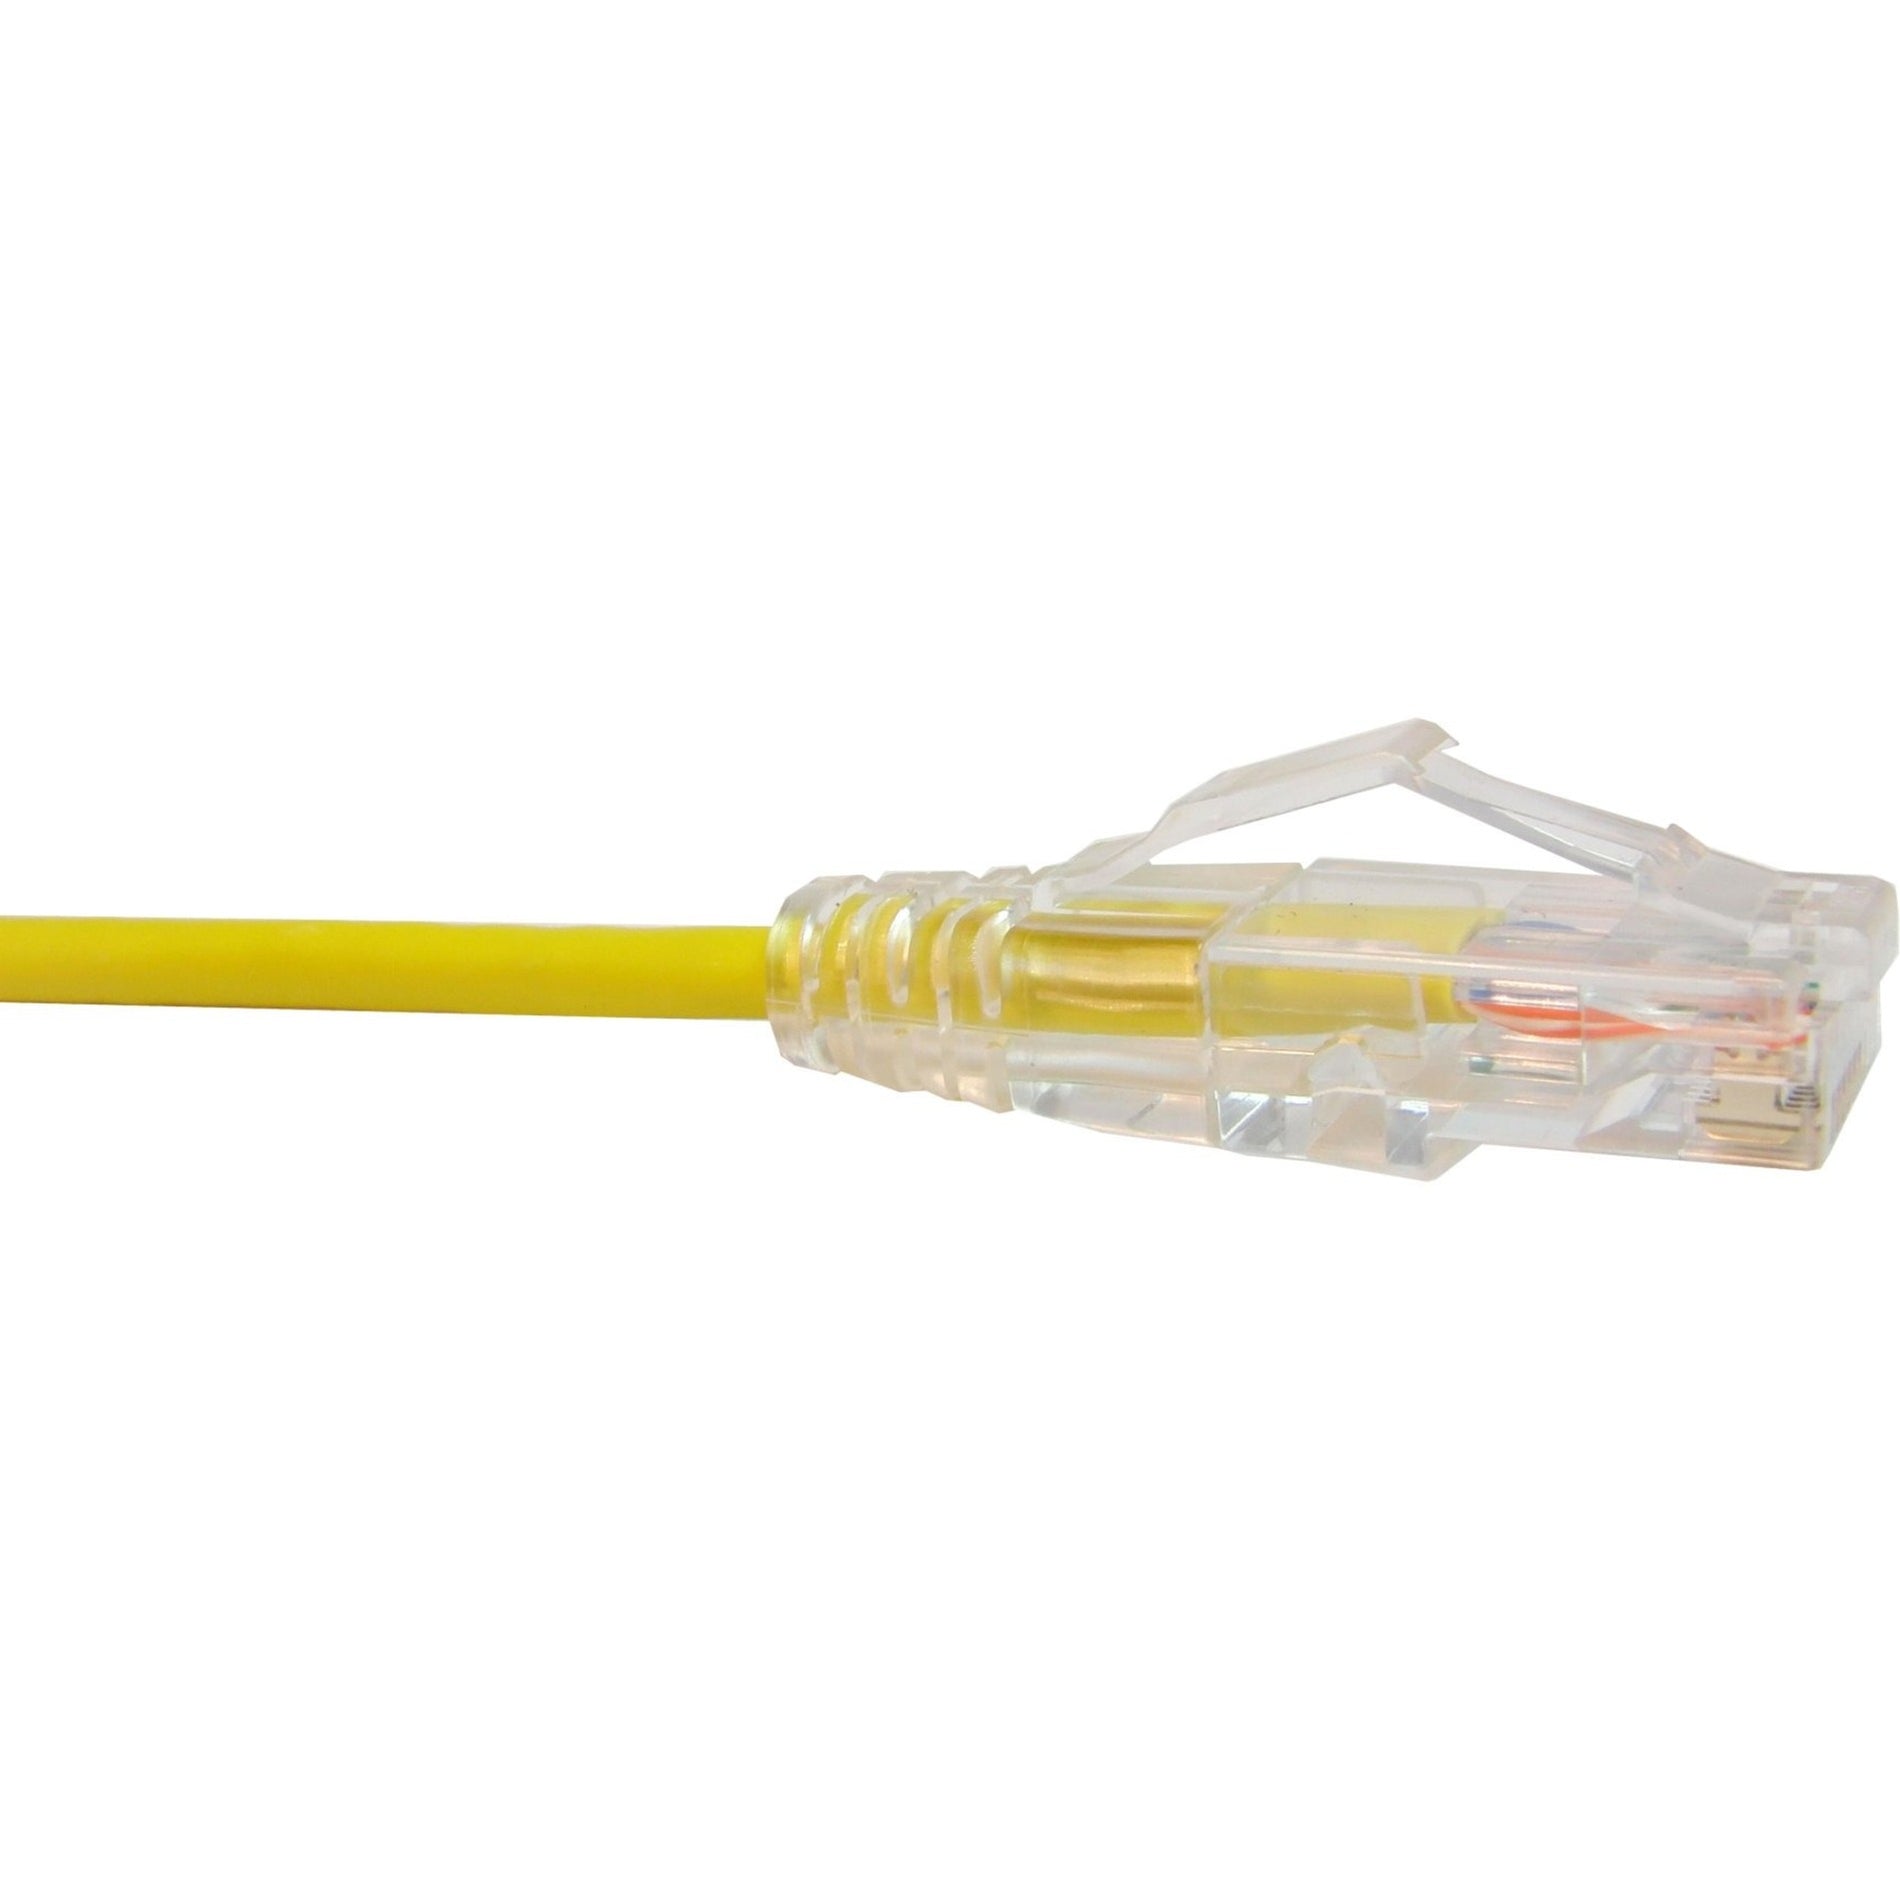 Unirise CS6-03F-YLW Clearfit Slim Cat6 Patch Cable, Snagless, Yellow, 3ft